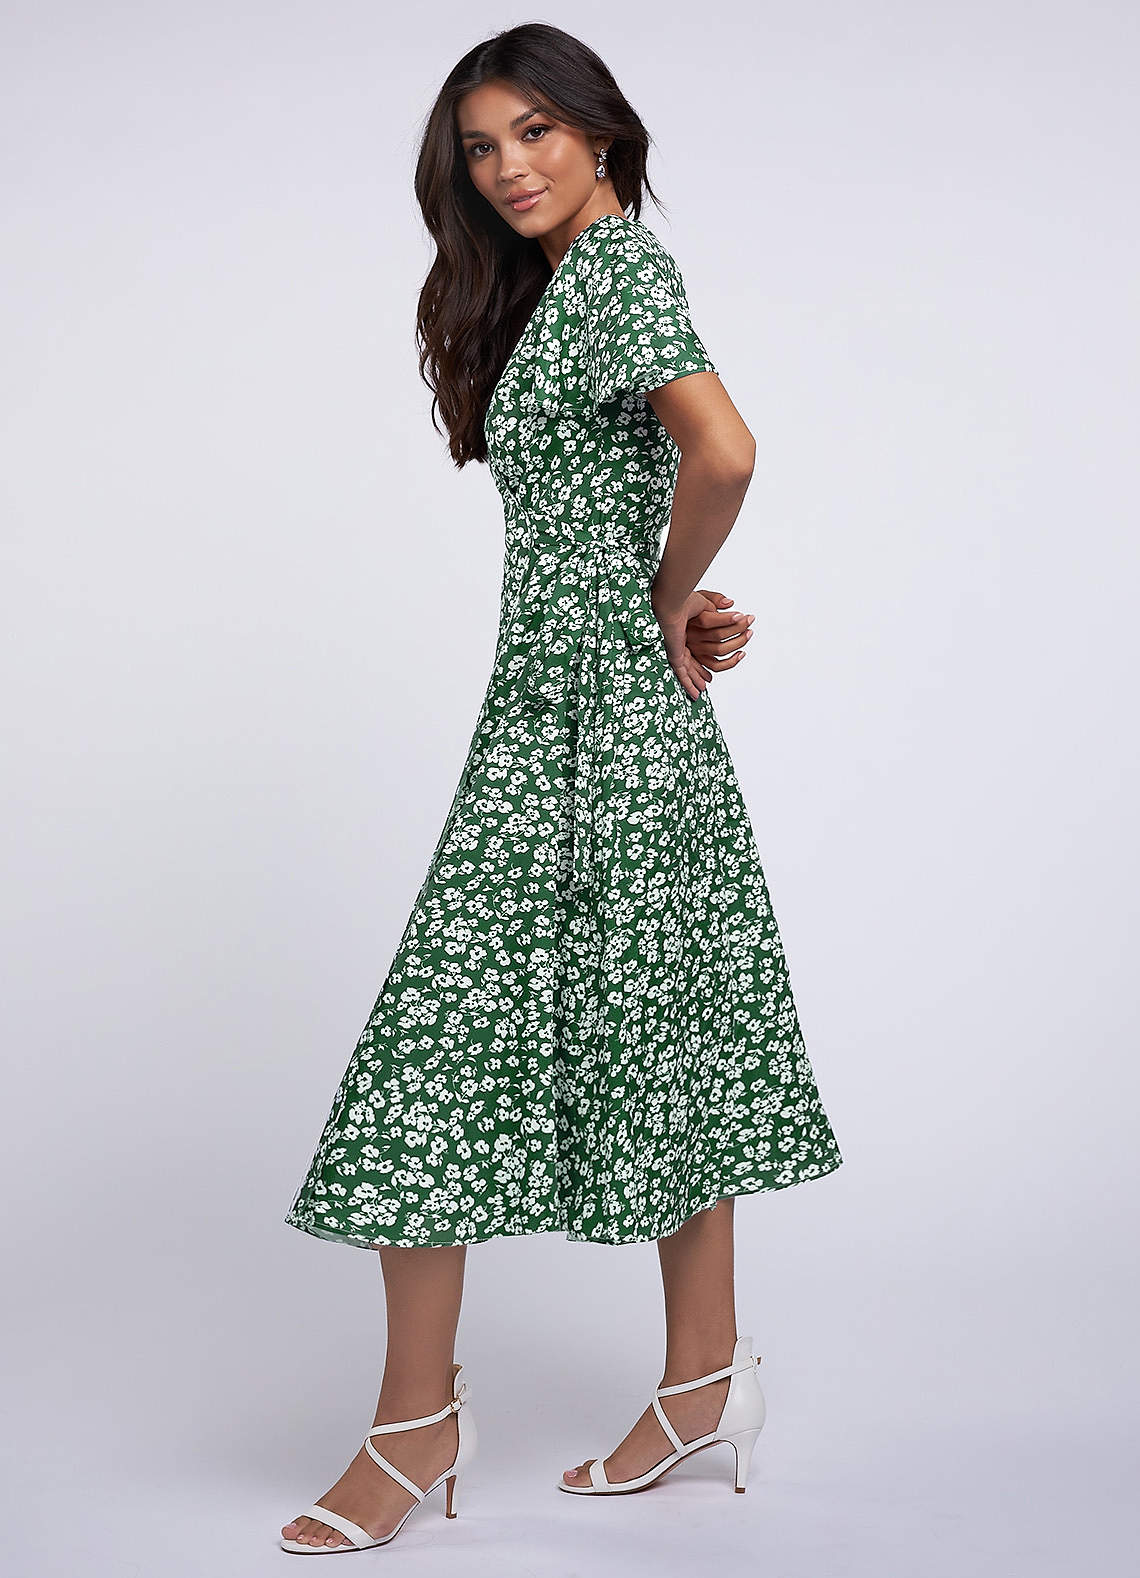 Express Yourself Green Floral Print Wrap Dress image1